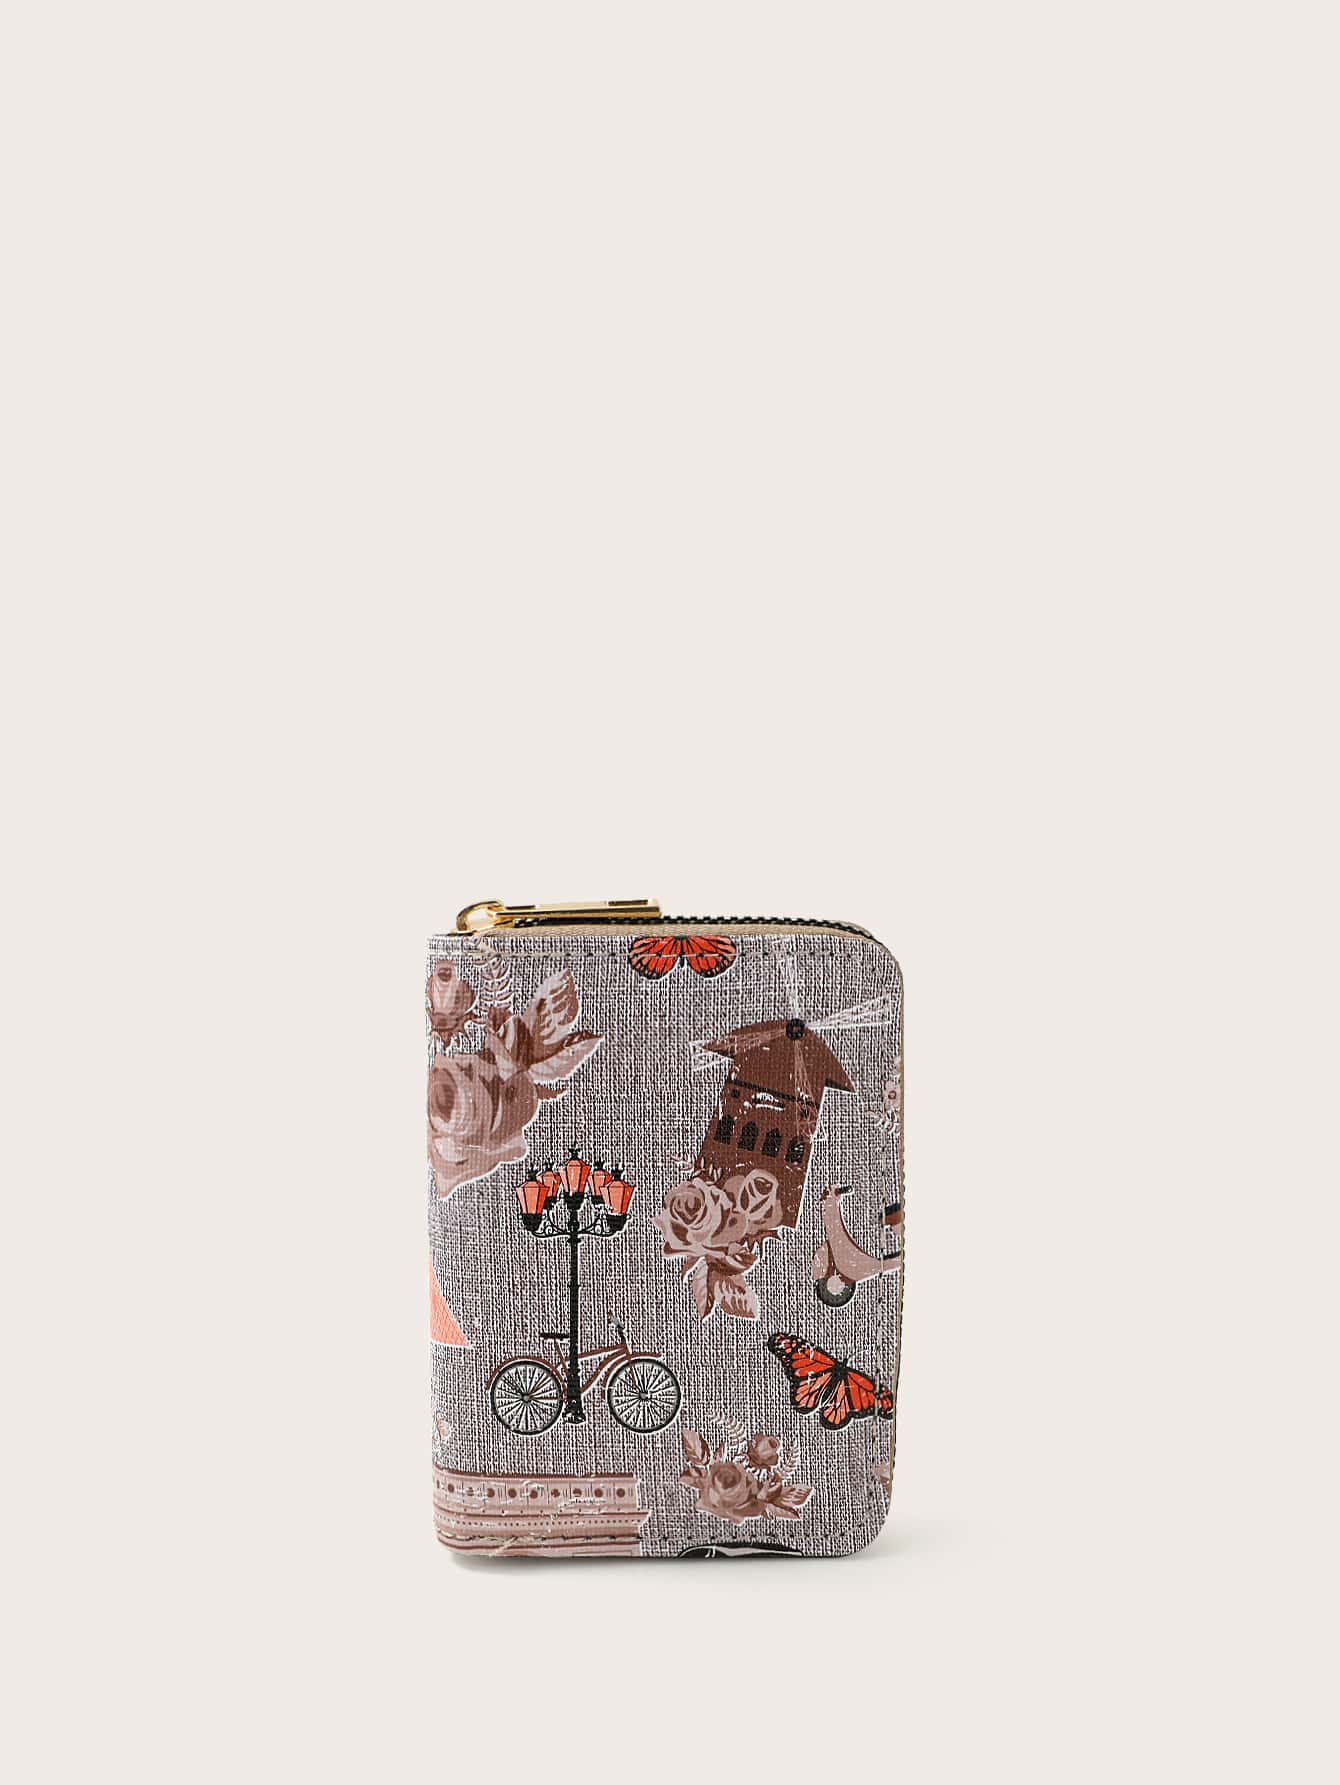 Floral & Butterfly Graphic Zip Around Card Holder